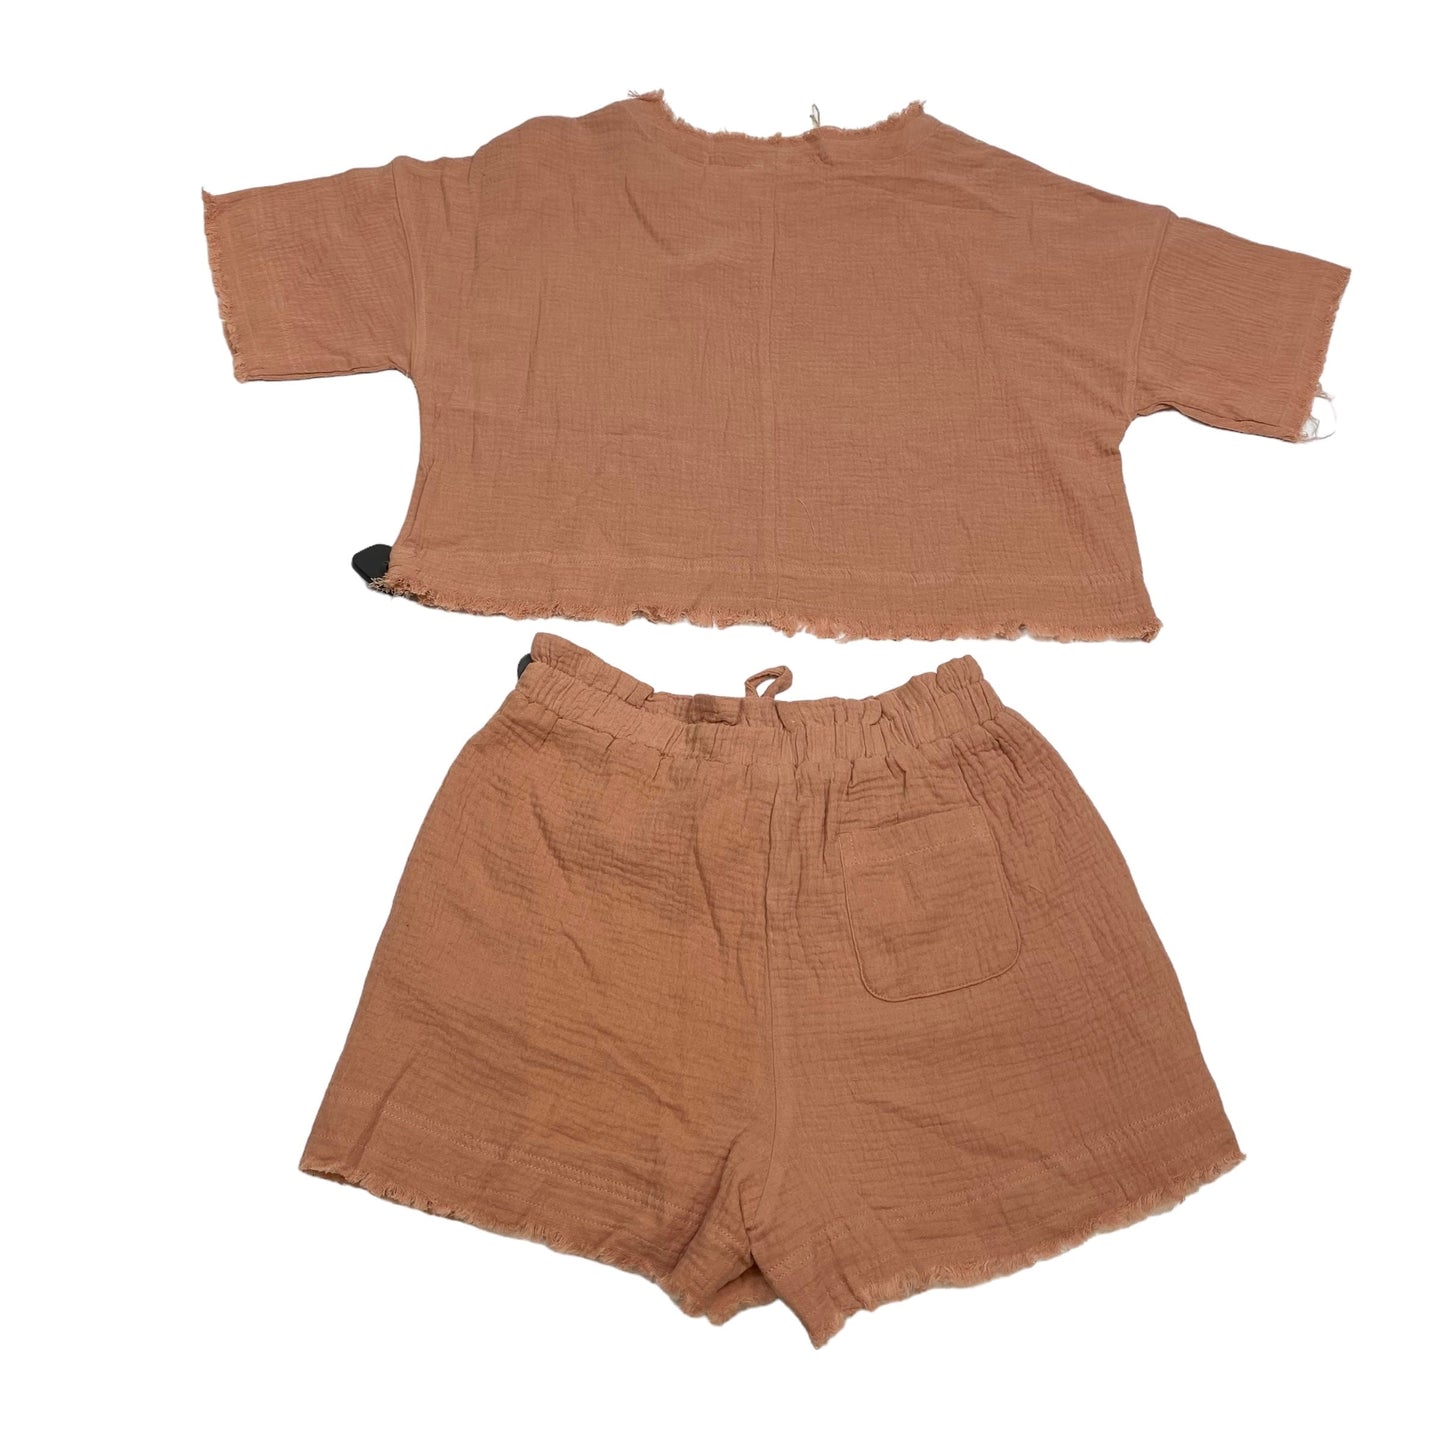 Brown Shorts Set New In, Size M